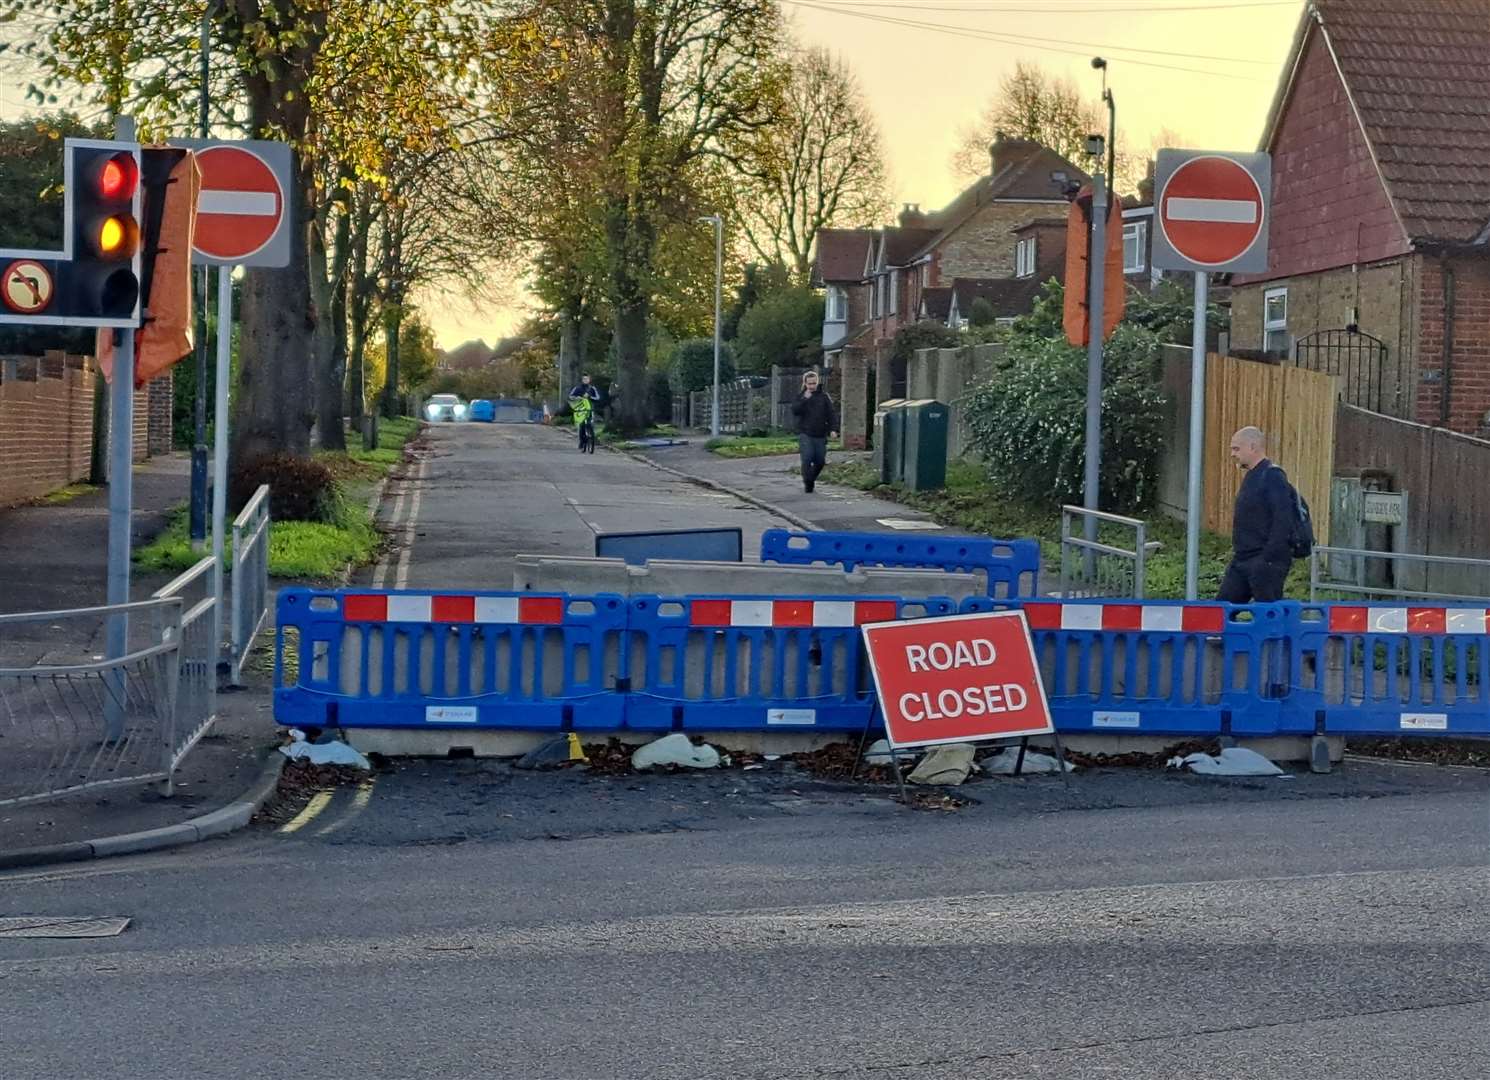 Cranborne Avenue has been closed to traffic for two years